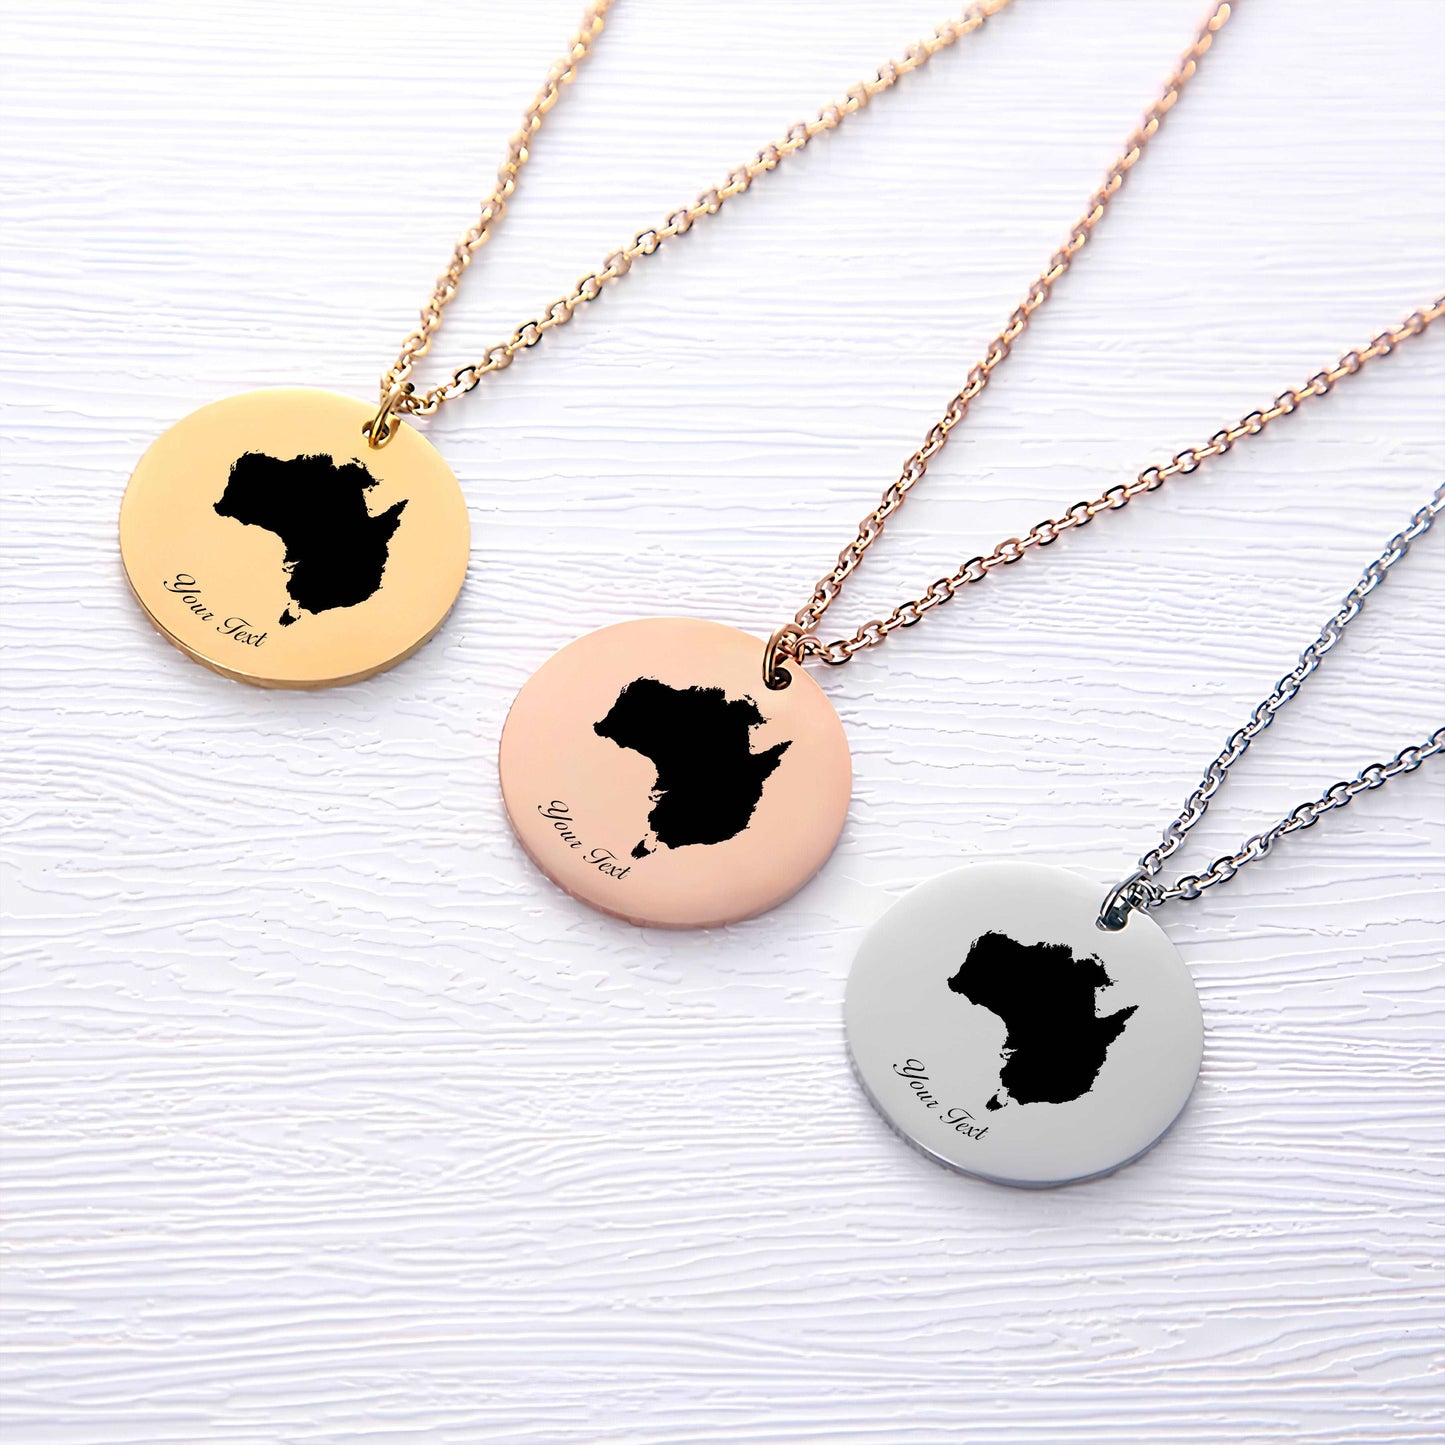 Australia Country Map Necklace - Personalizable Jewelry